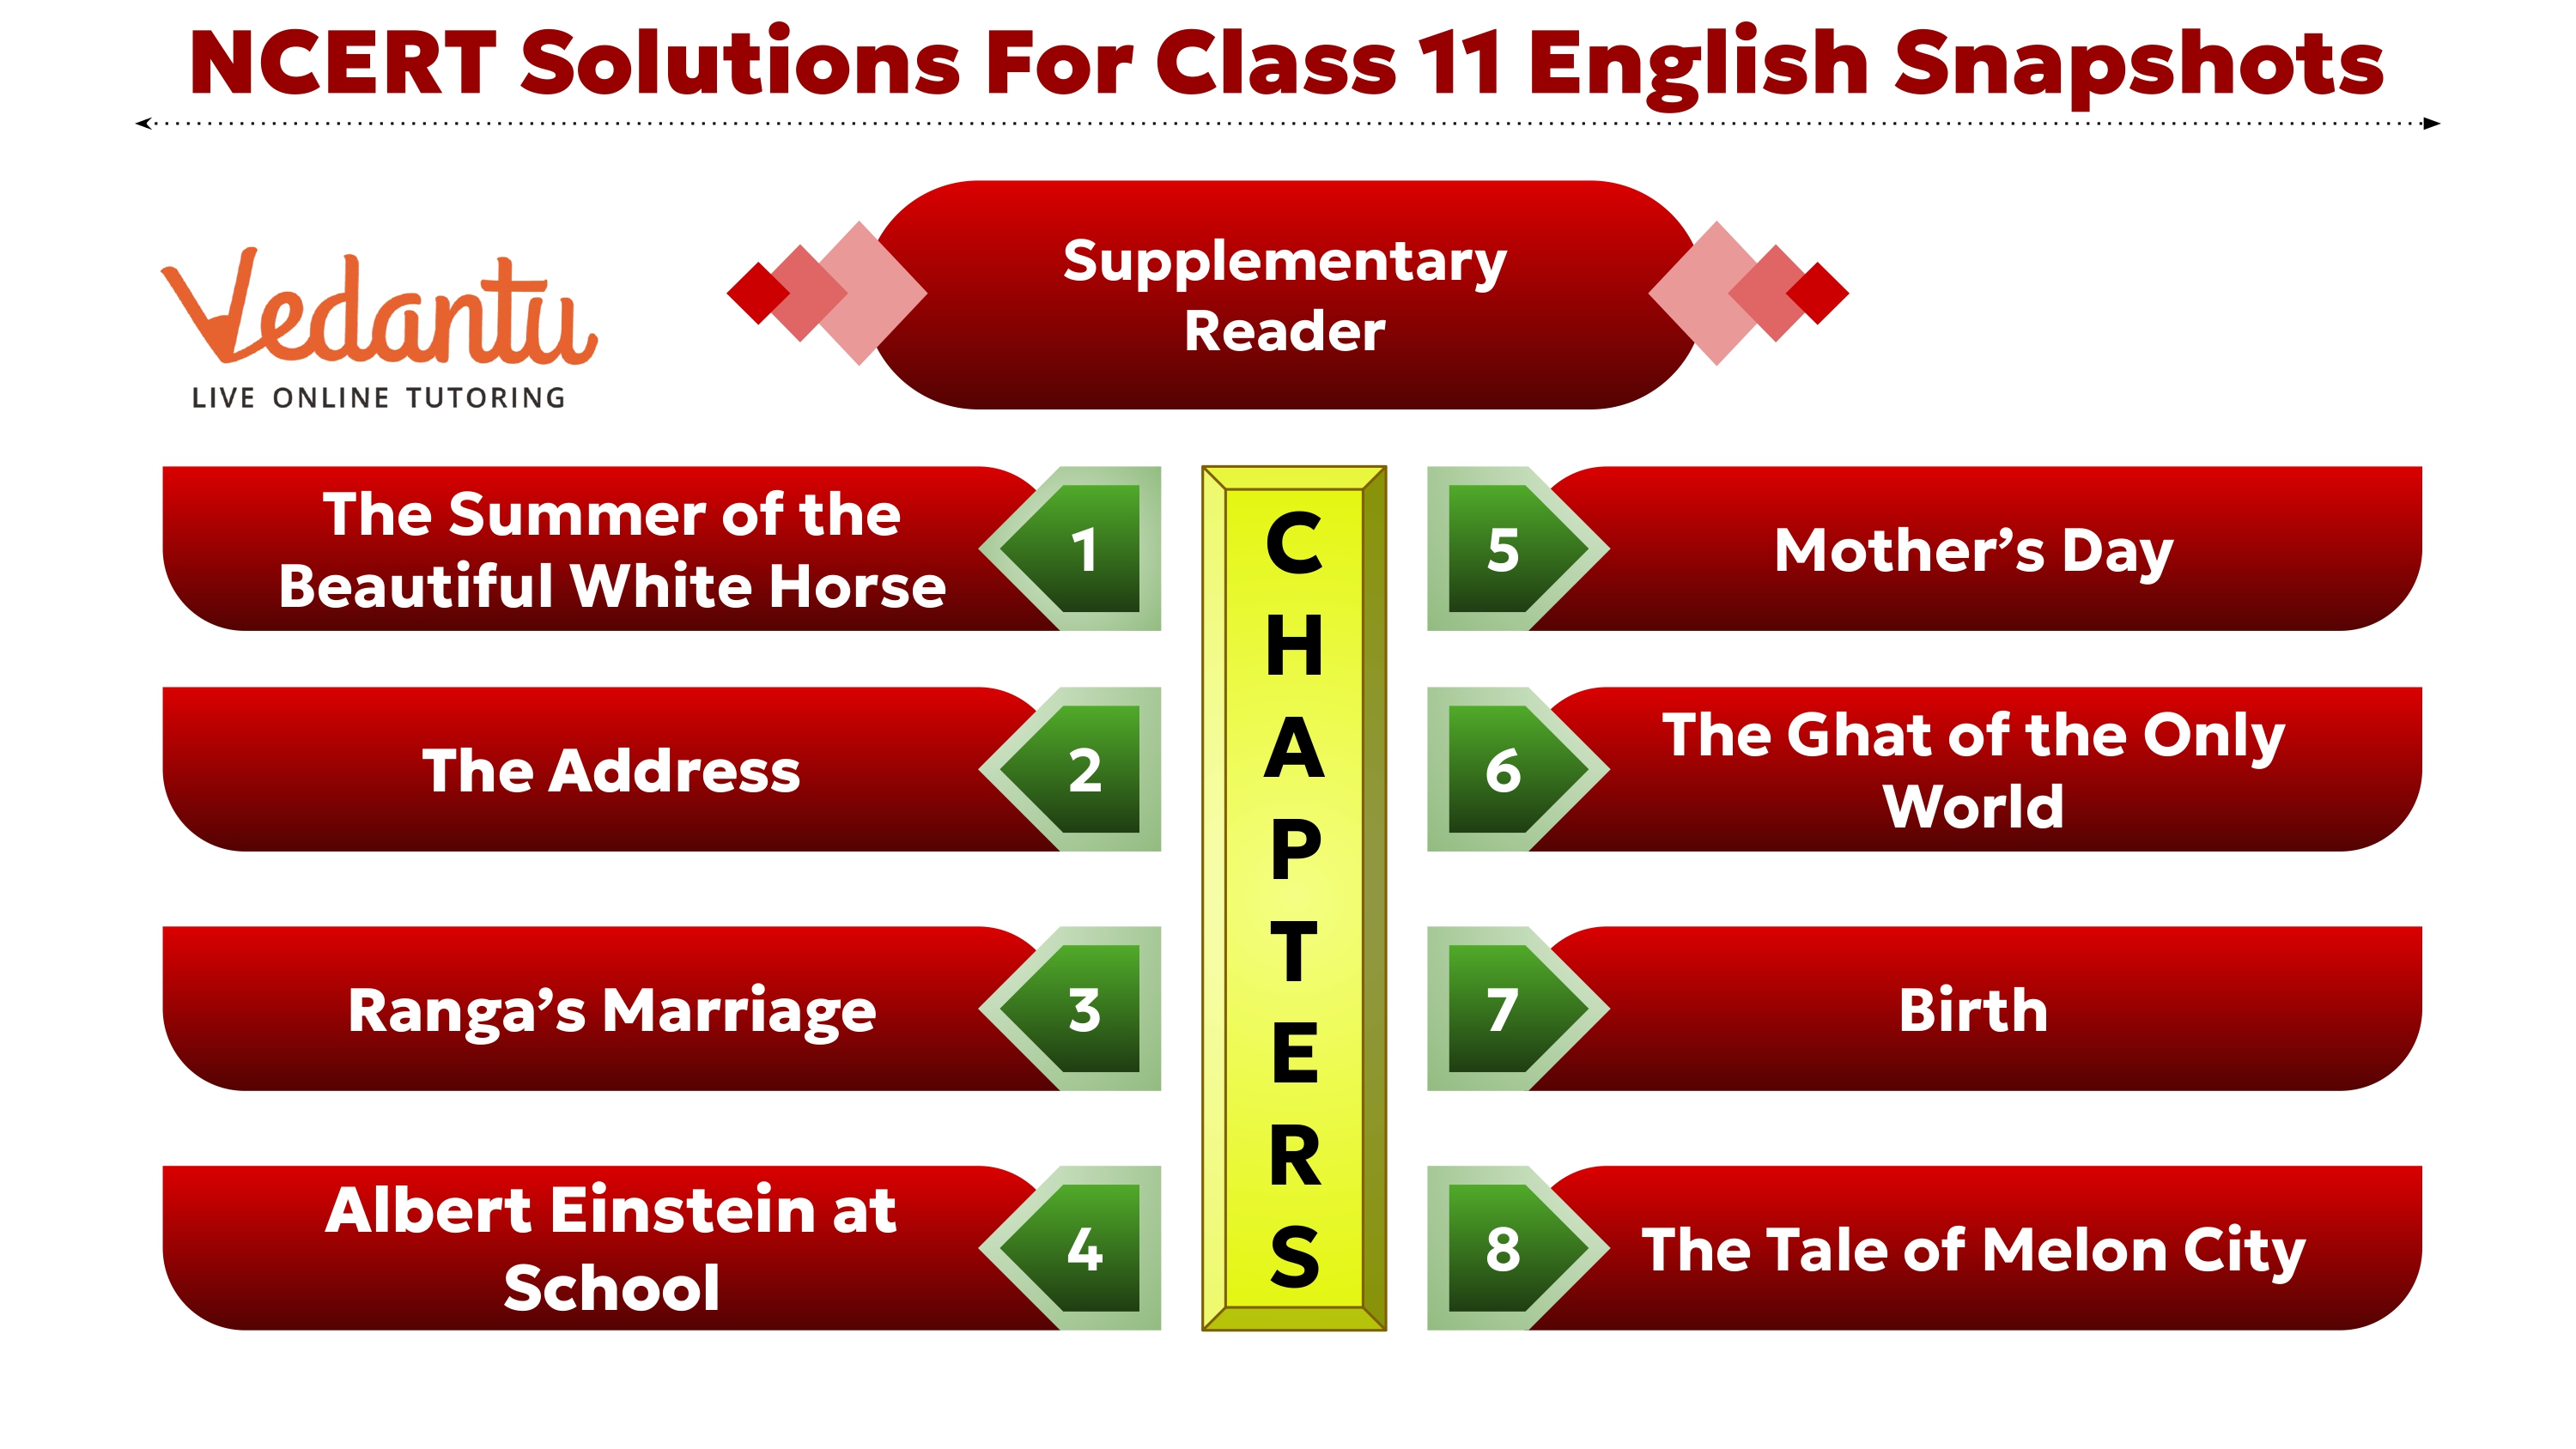 NCERT Solutions for Class 11 English Snapshots Chapter-wise Overview